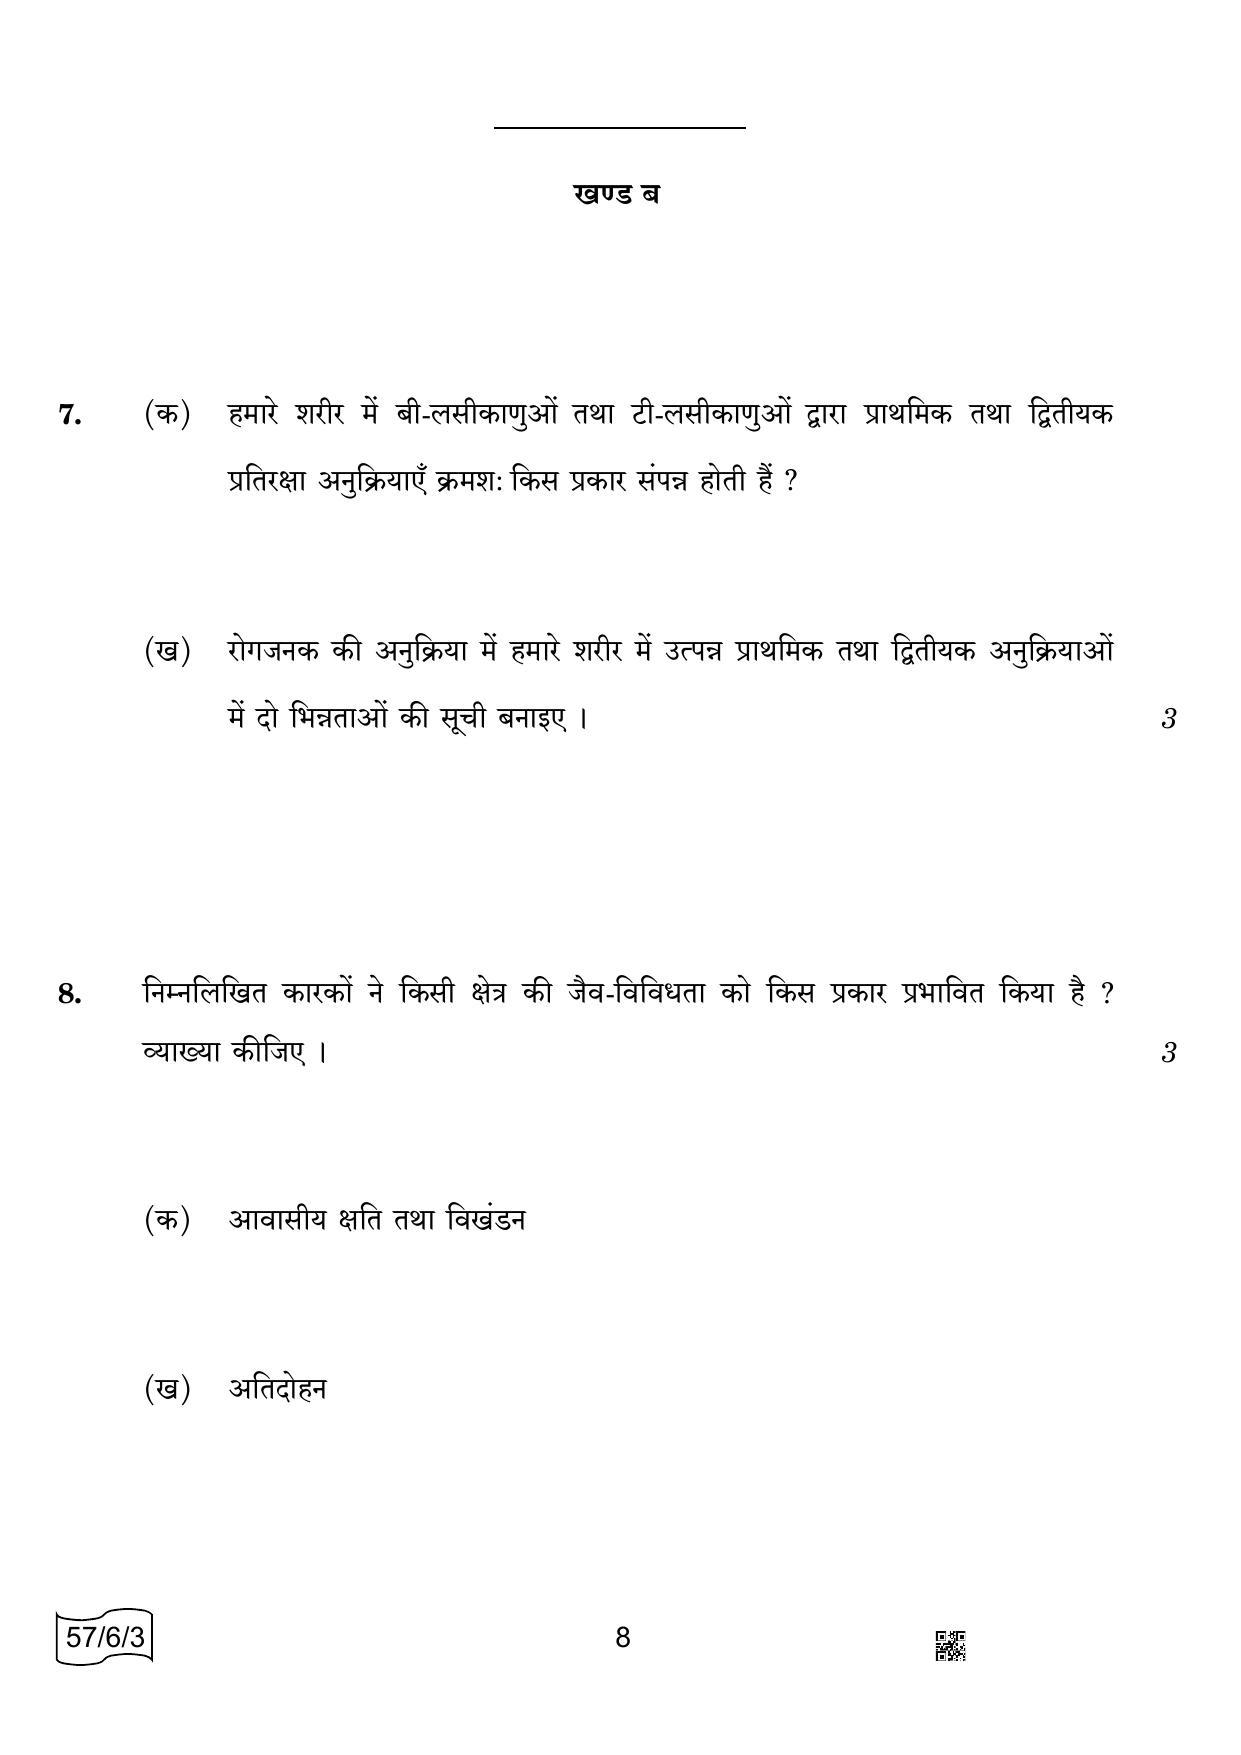 CBSE Class 12 57-6-3 BIOLOGY 2022 Compartment Question Paper - Page 8